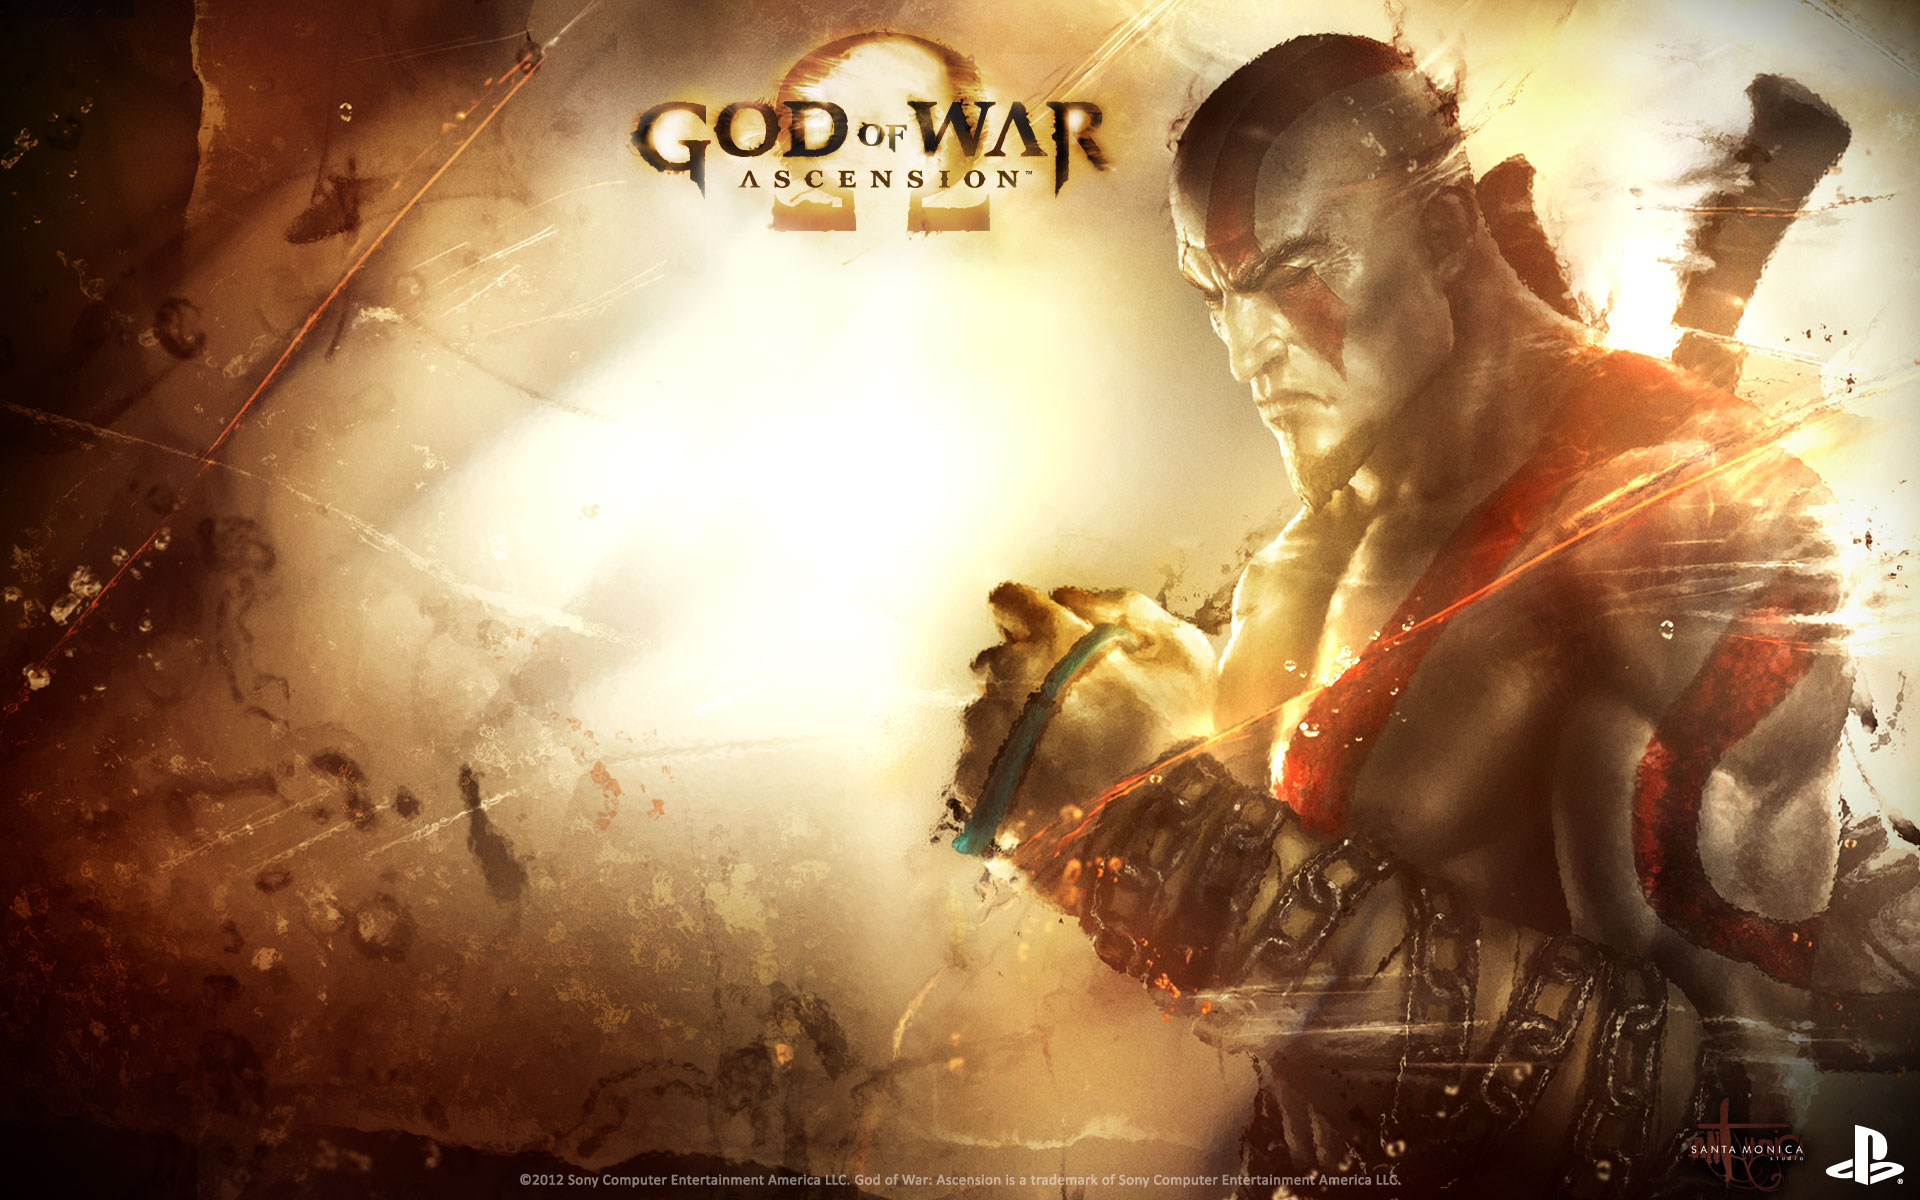  God of War Ascension Wallpapers HD Wallpapers